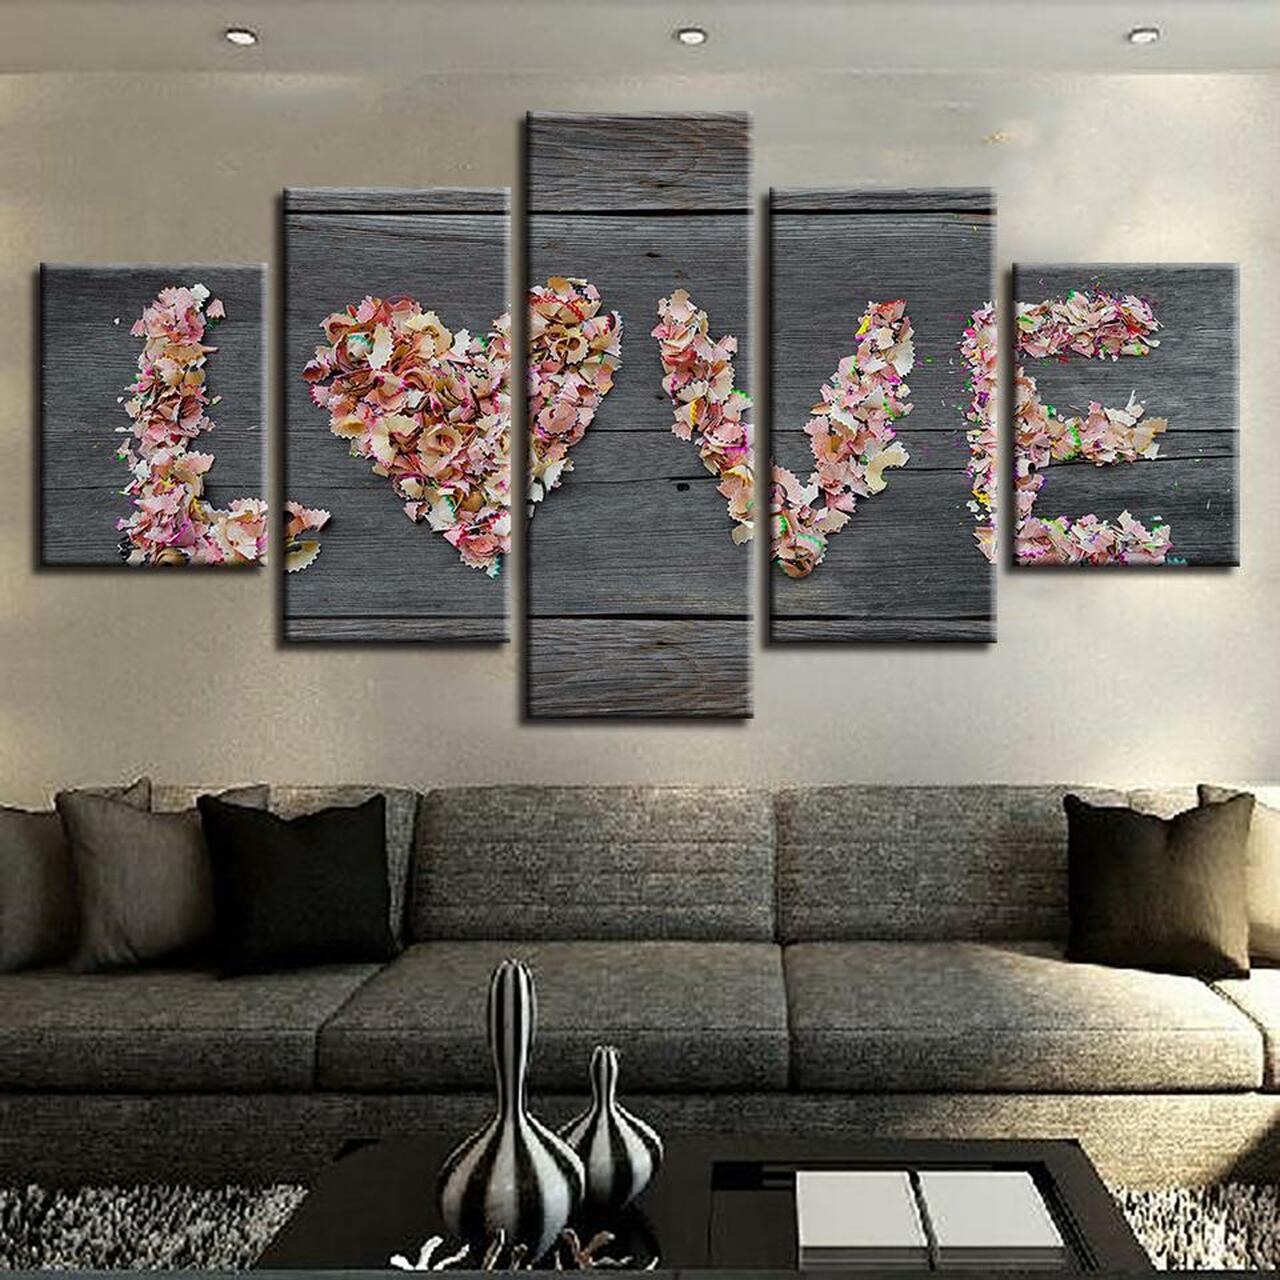 Love with Rose Petals 5 Piece Canvas Art Wall Decor